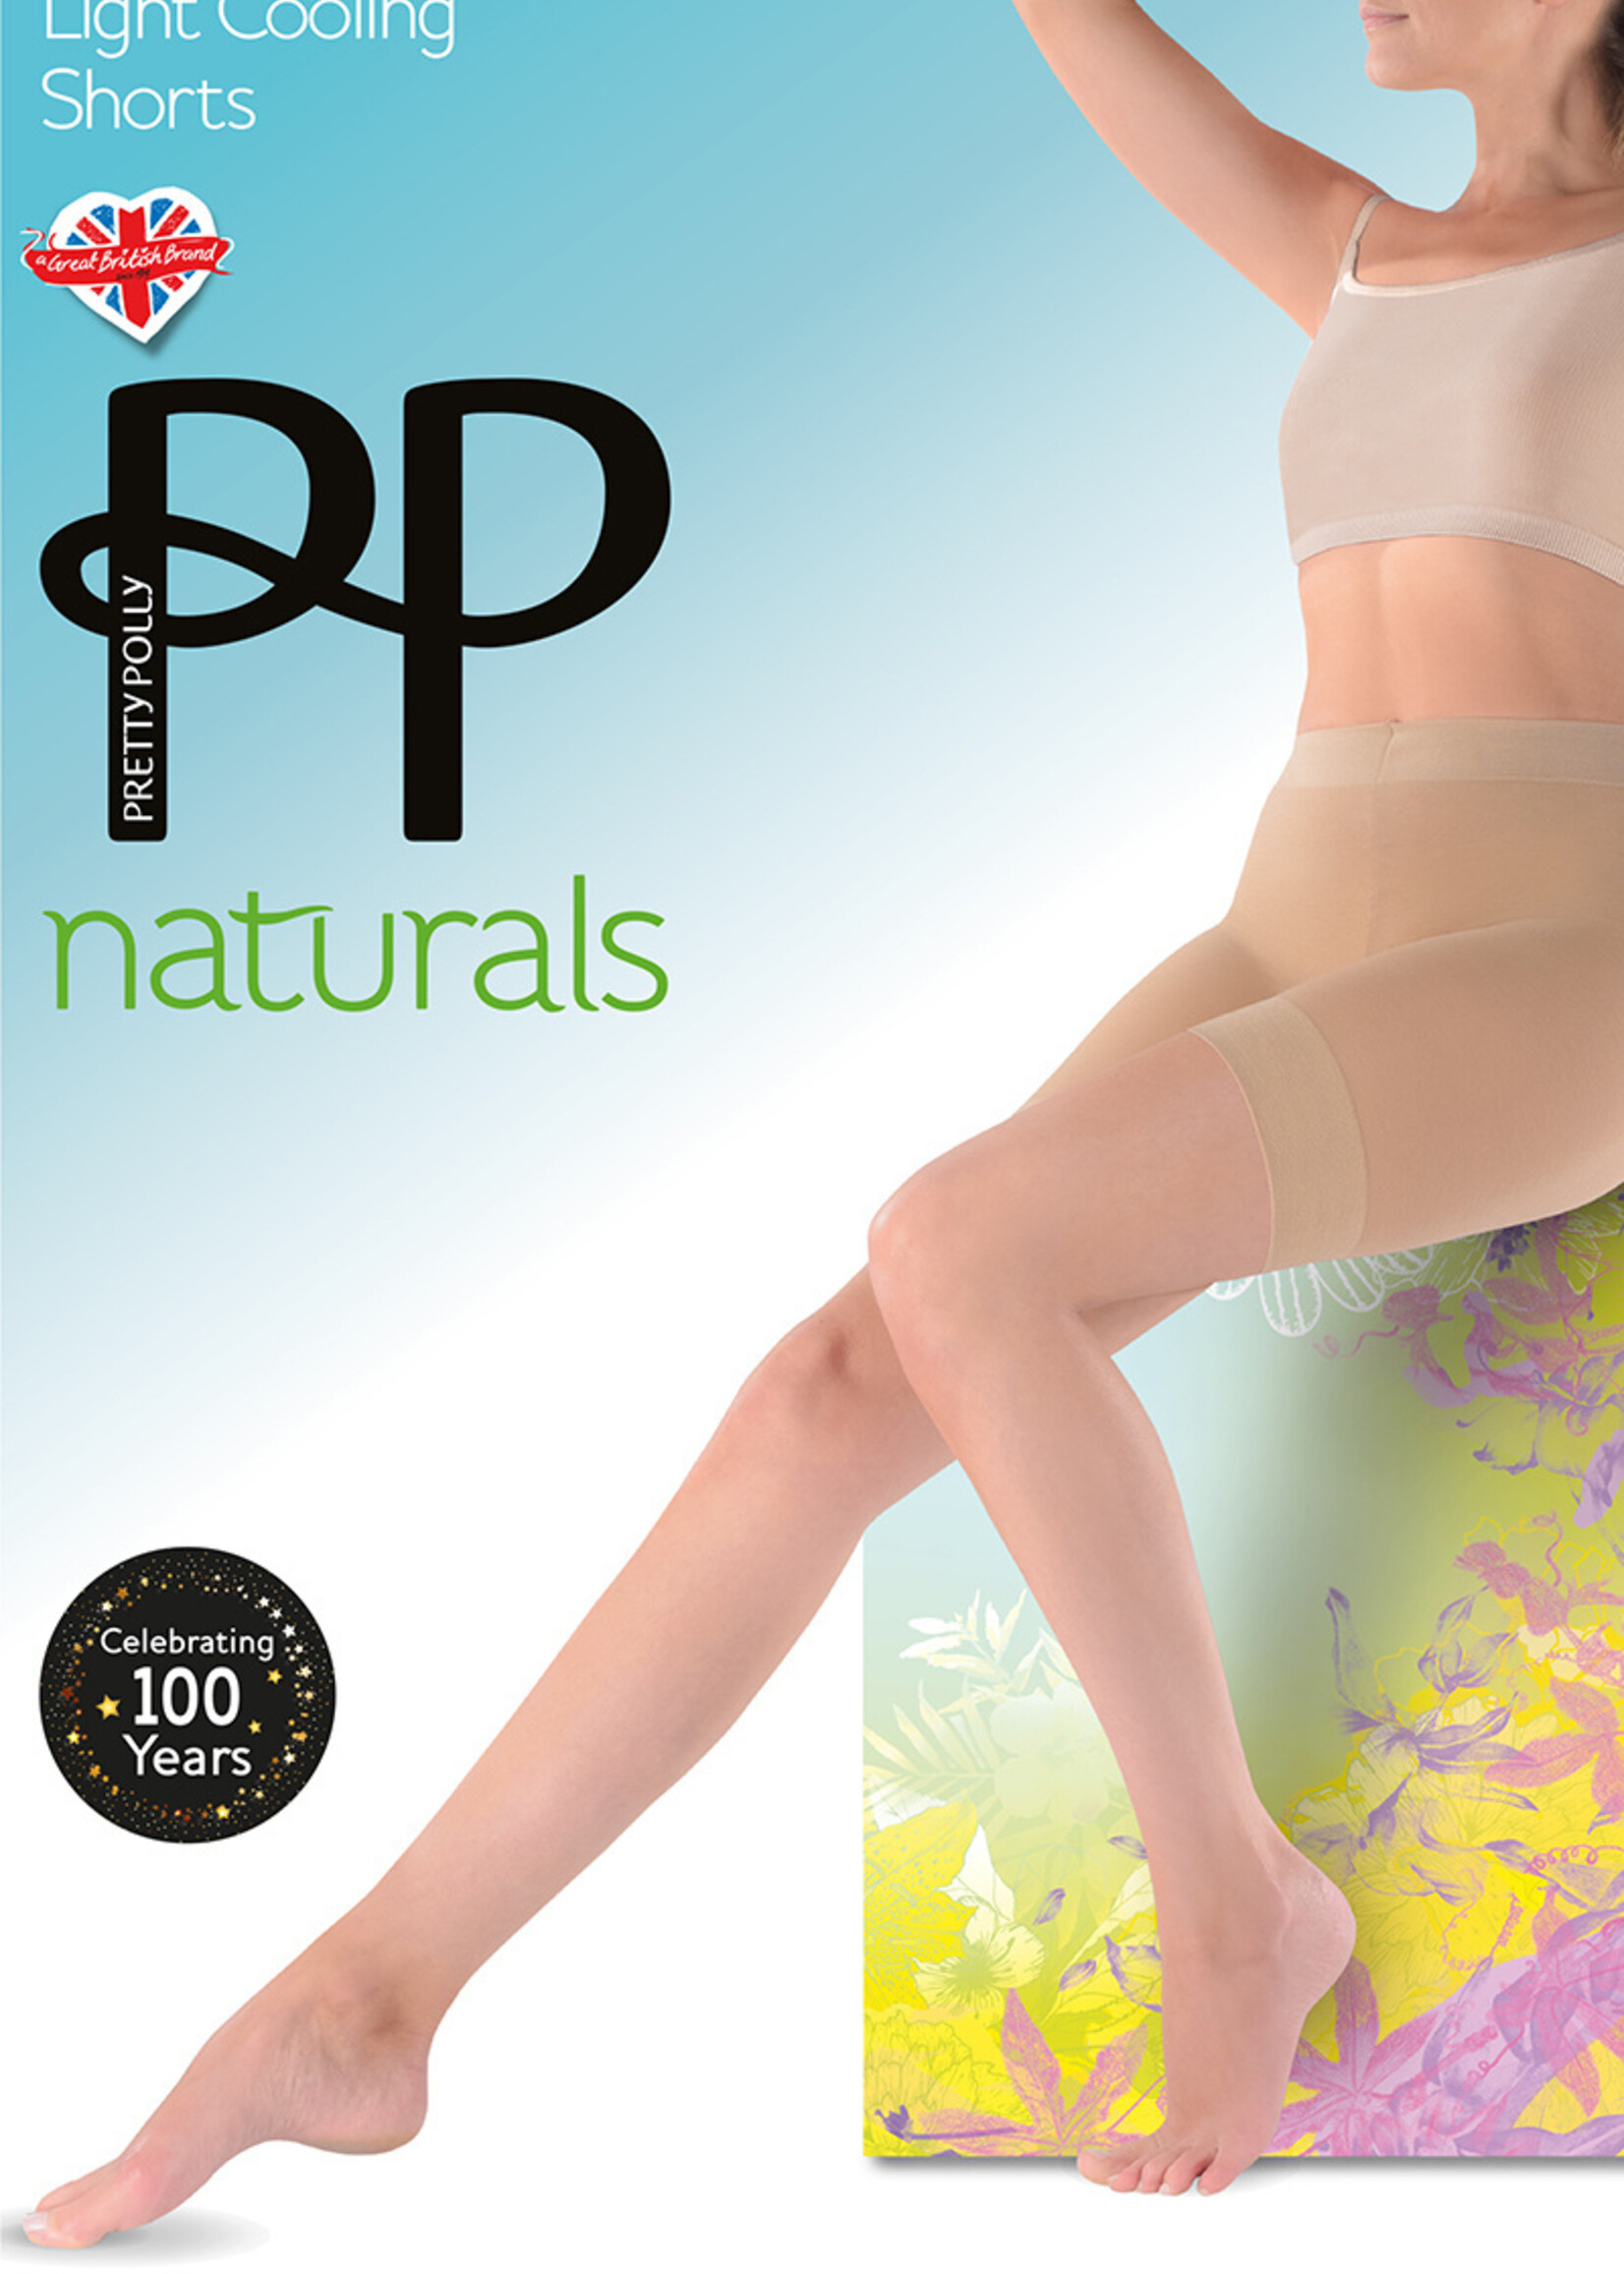 Pretty Polly  Pretty Polly "Naturals" Light Cooling Shorts